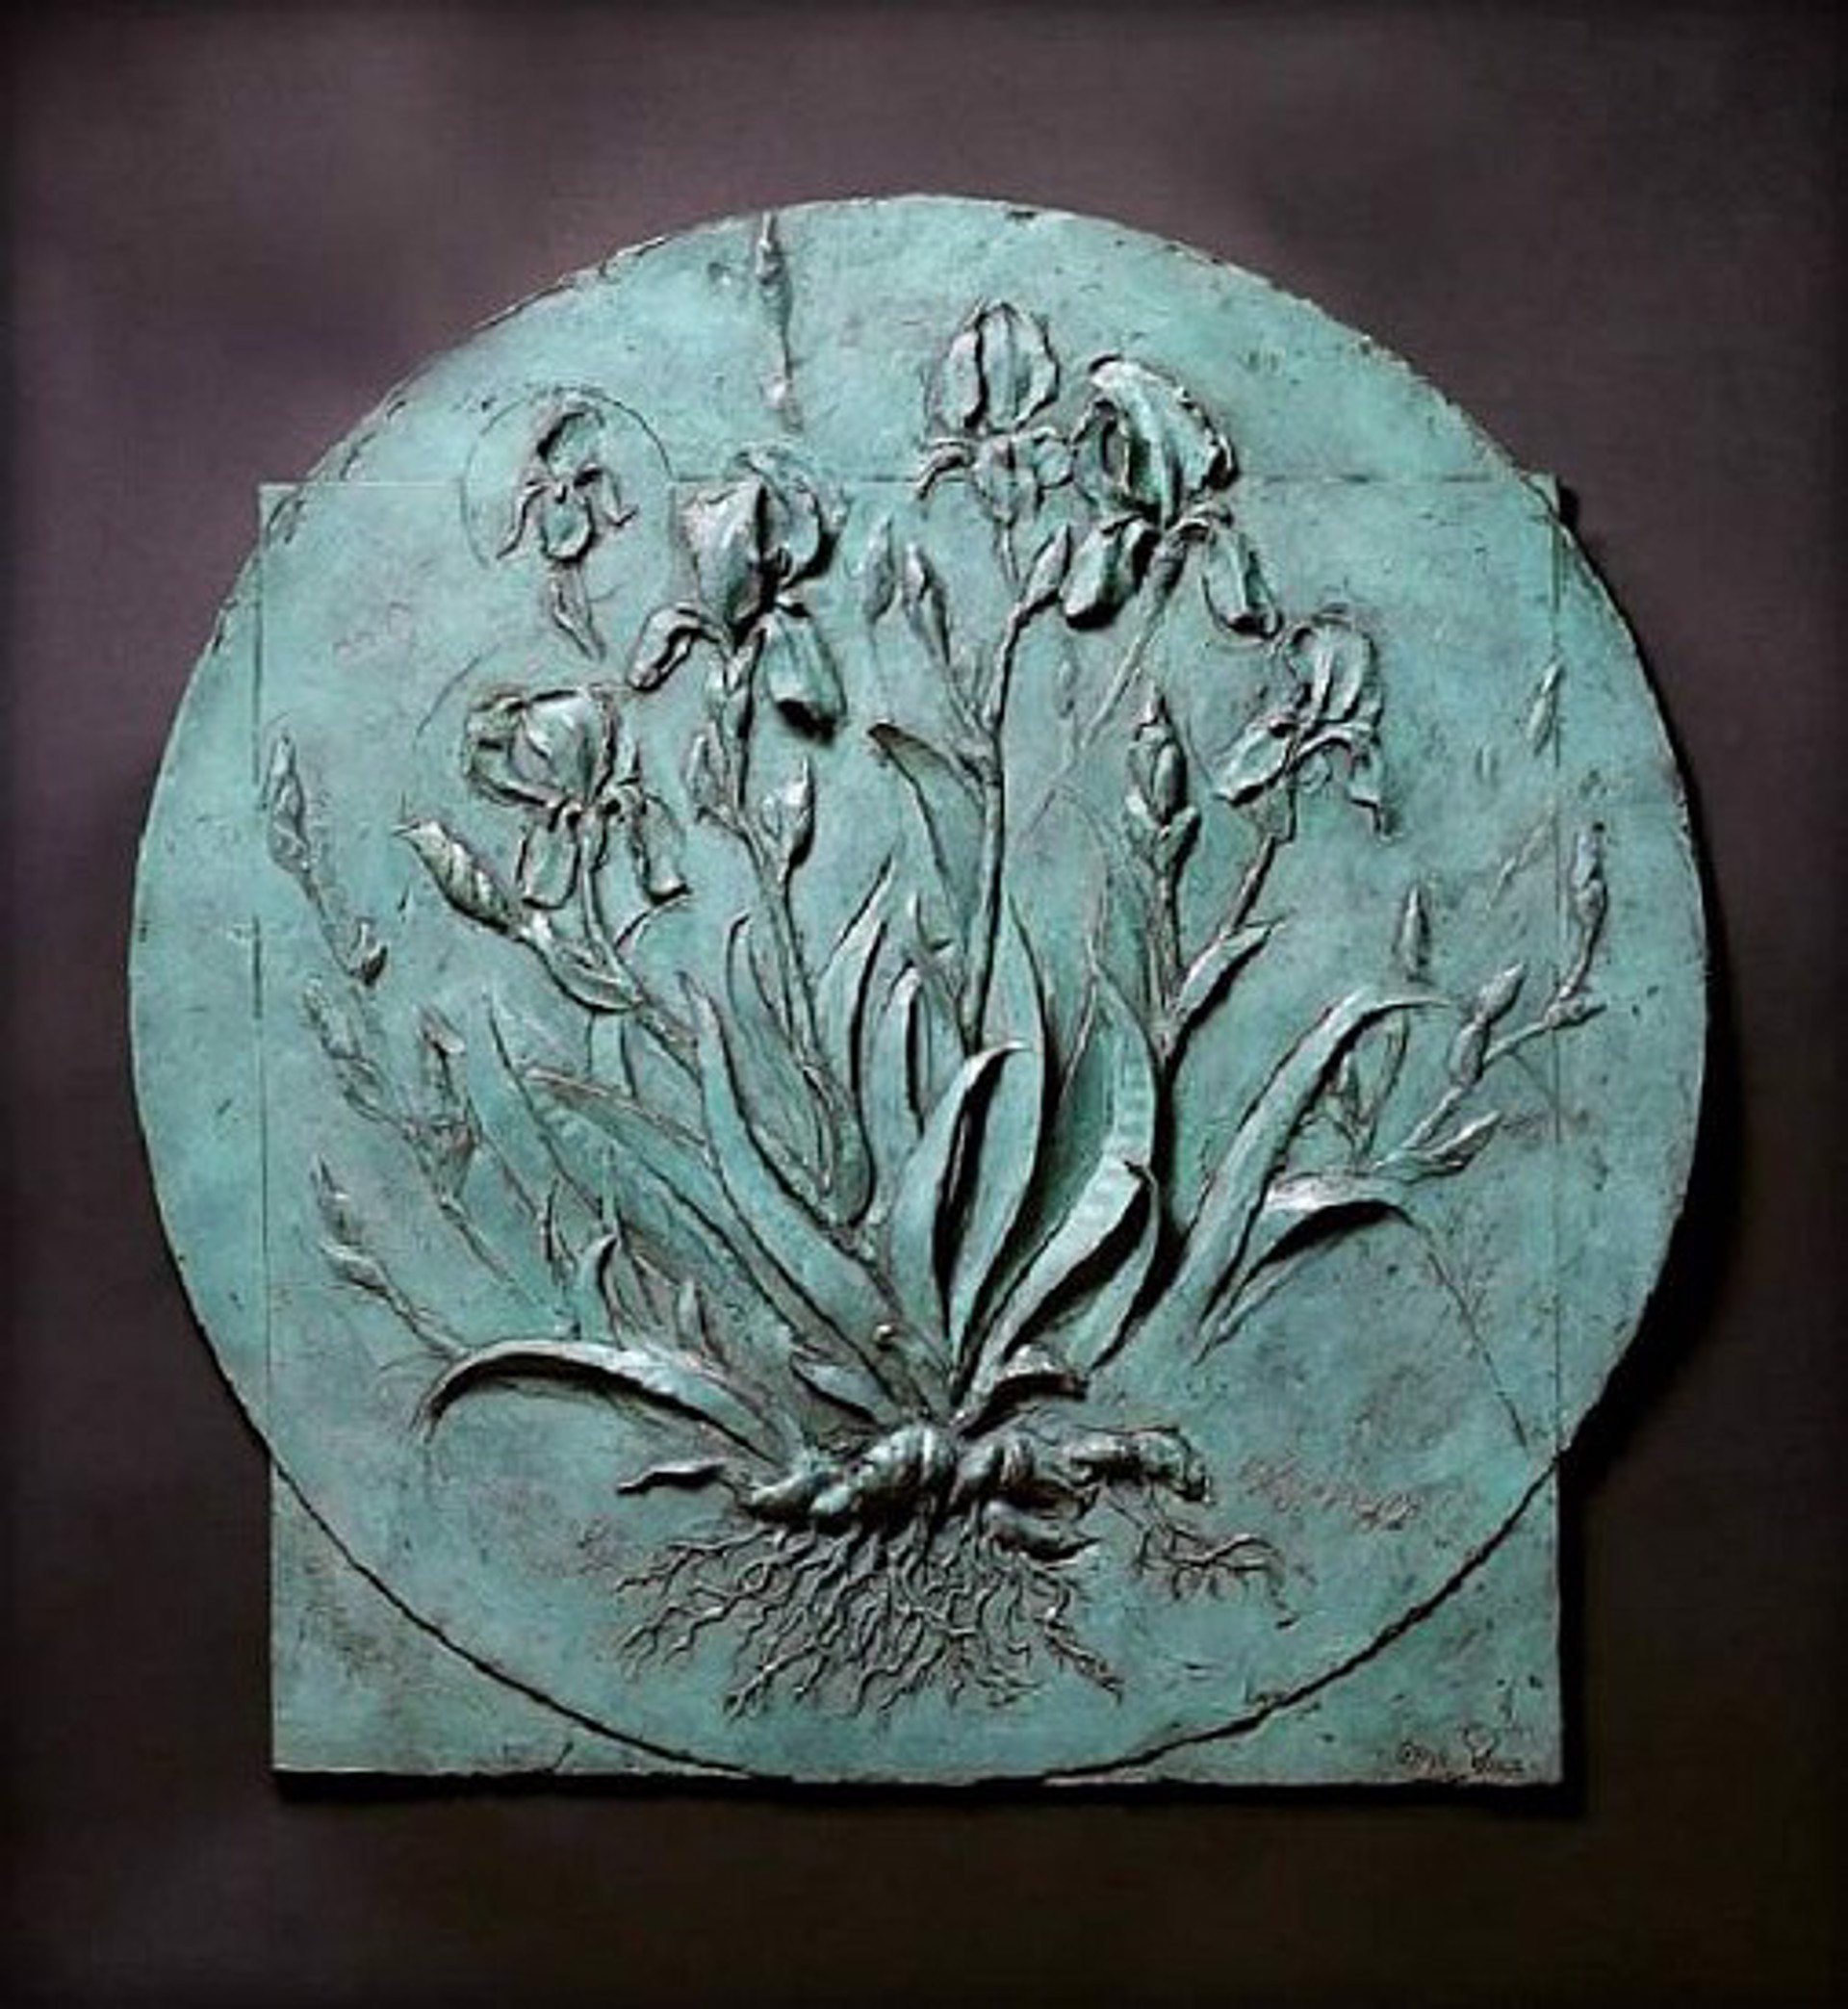 Irises by Gary Lee Price (sculptor)